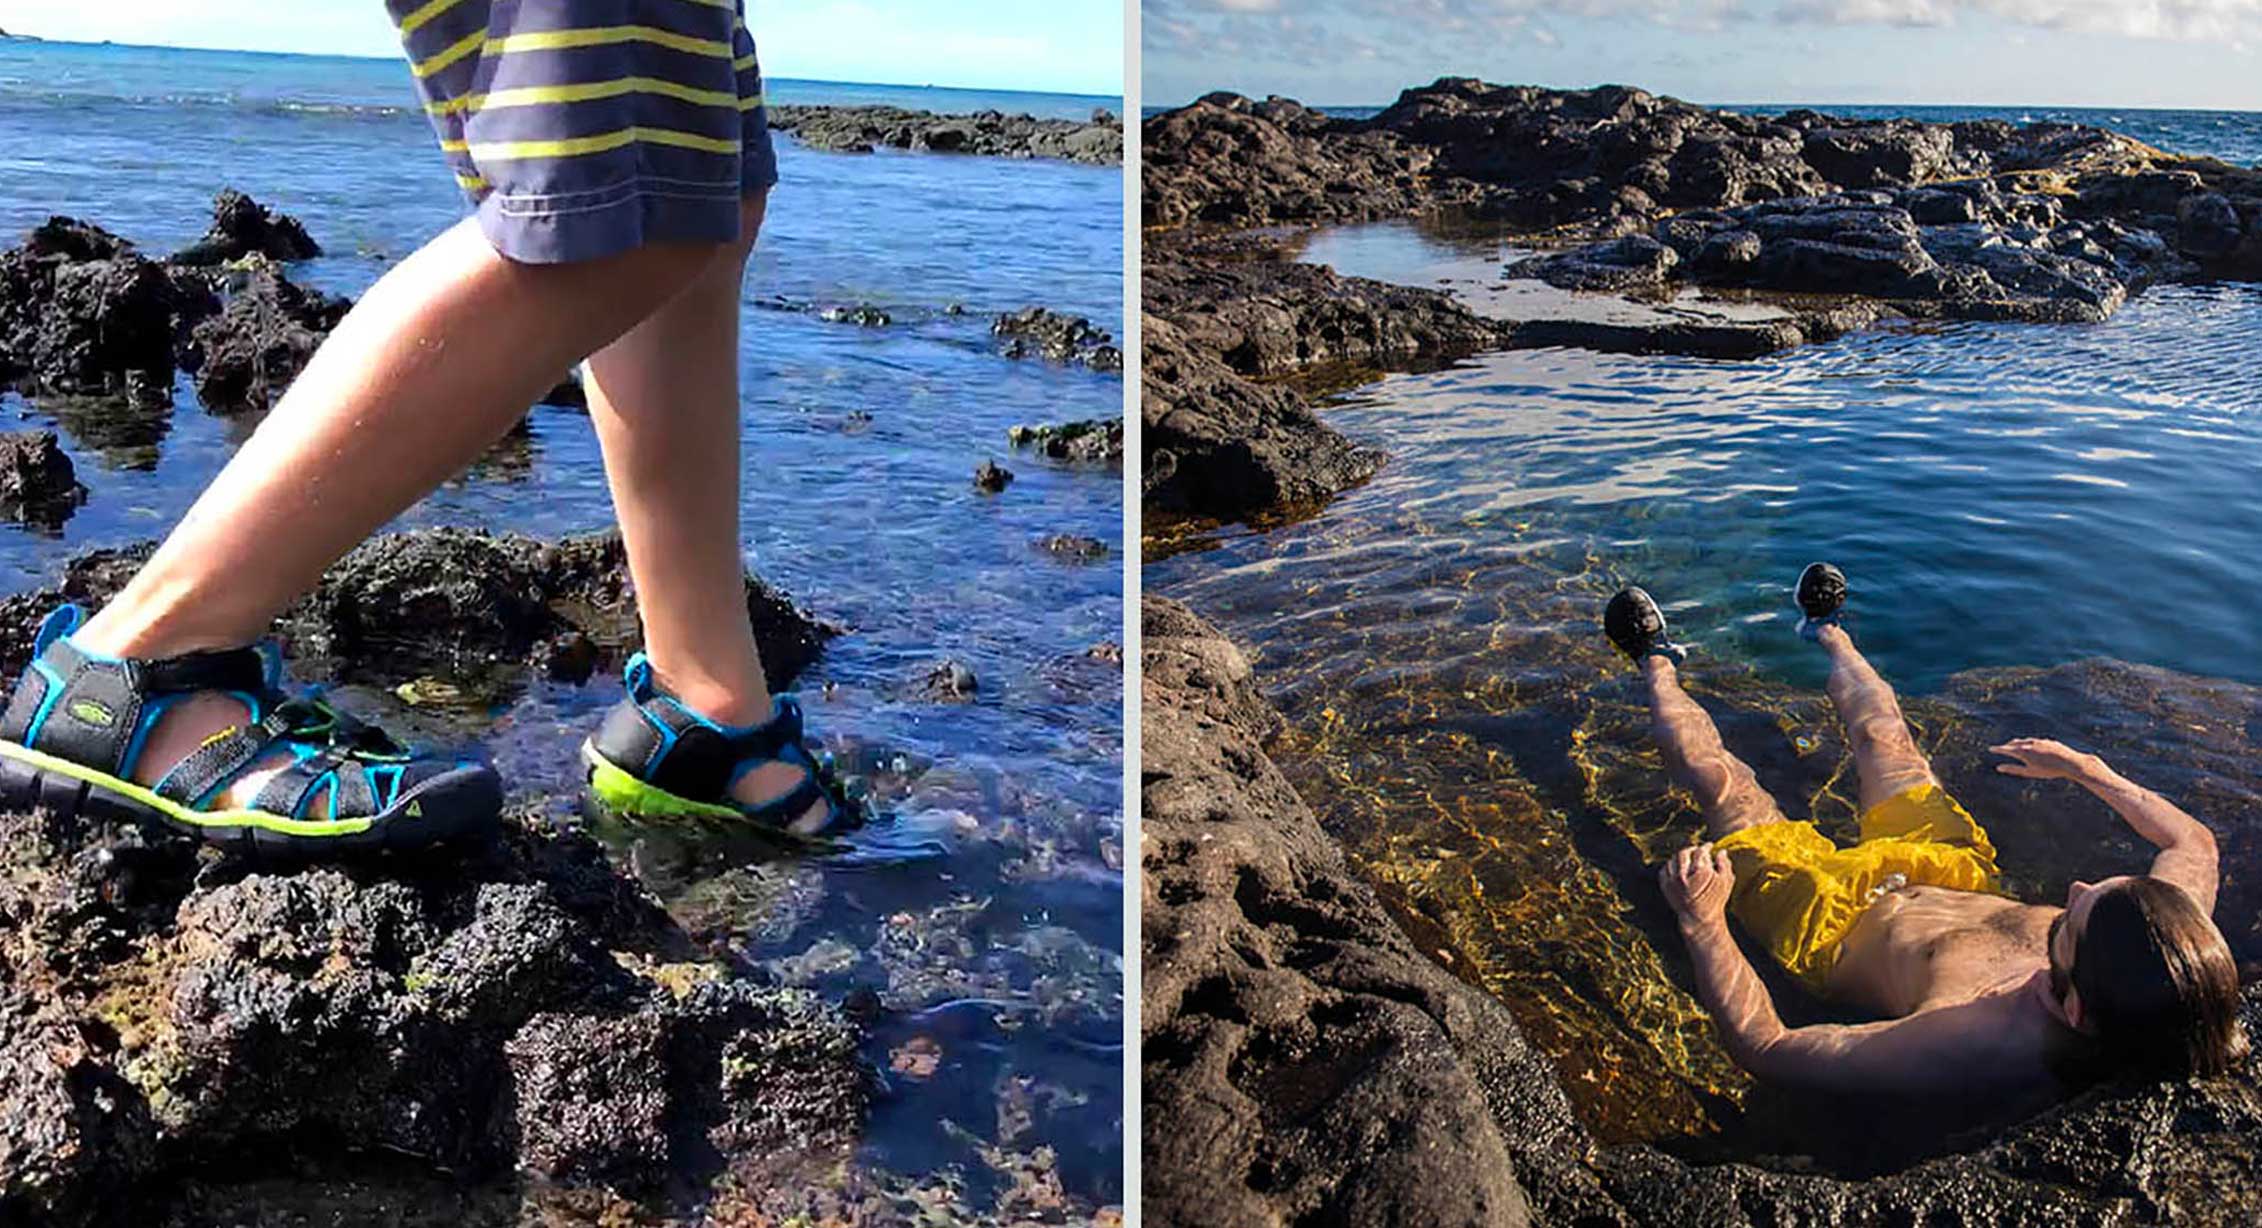 Navigating rocky beaches in Hawaii in KEEN water sandals